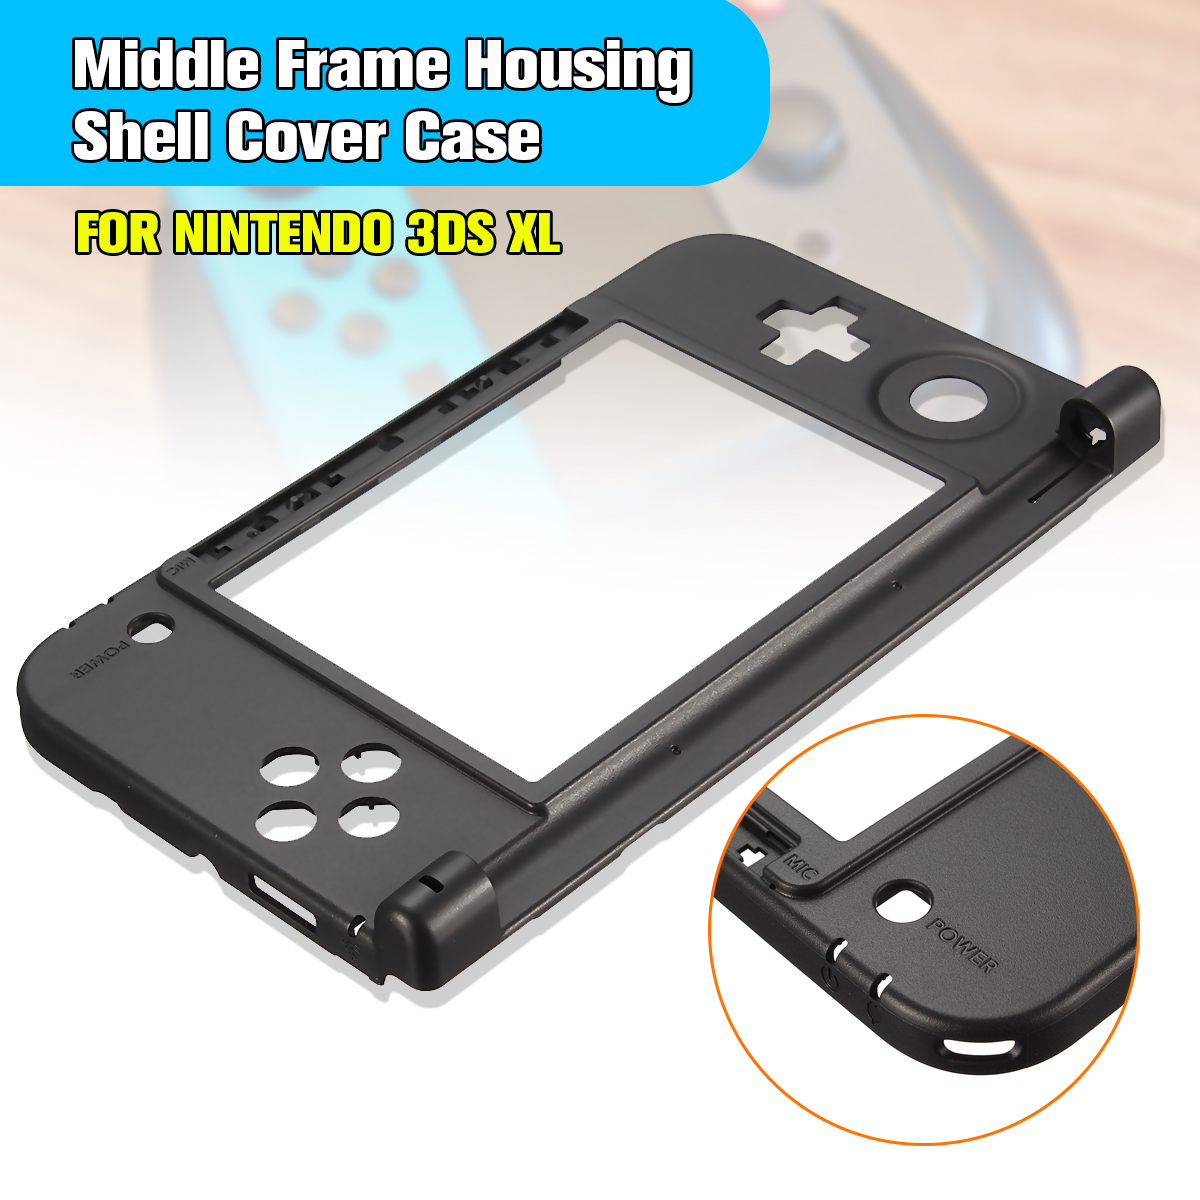 Replacement Bottom Middle Frame Housing Shell Cover Case for Nintendo 3DS XL 3DS LL Game Console 28